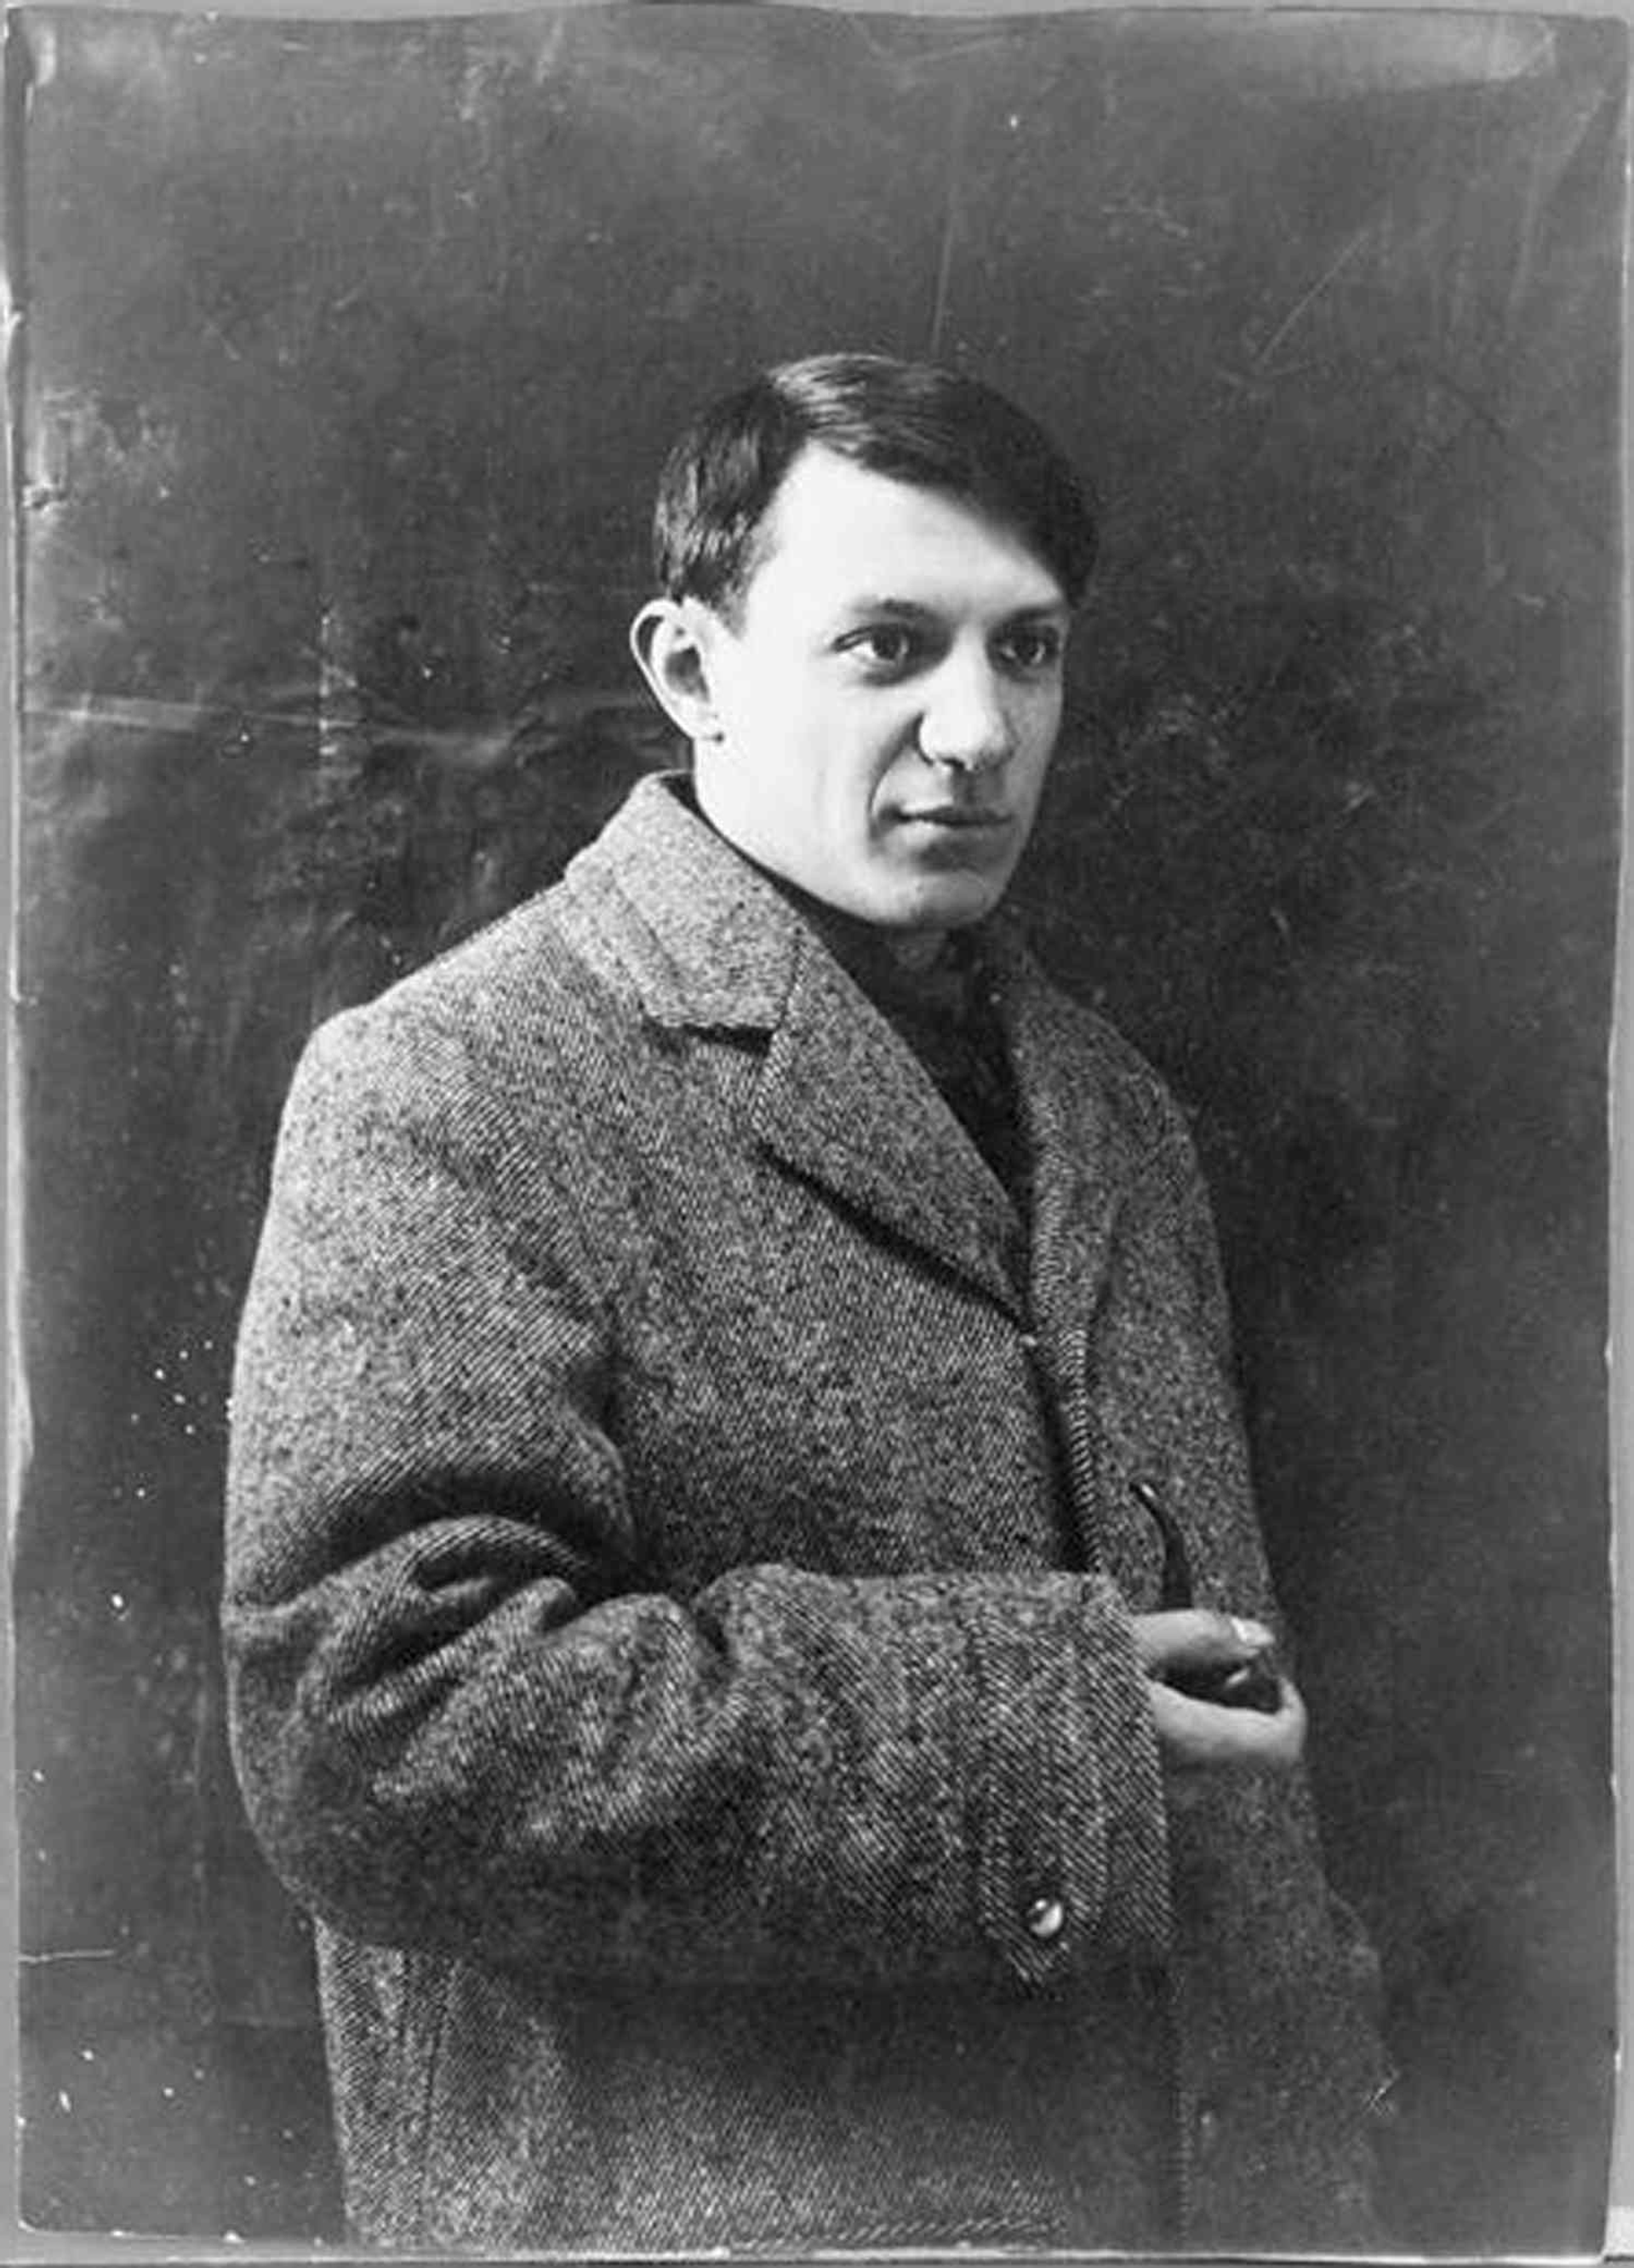 A monochrome photograph of the artist Pablo Picasso as a young man, wearing a woollen coat and looking slightly off camera.